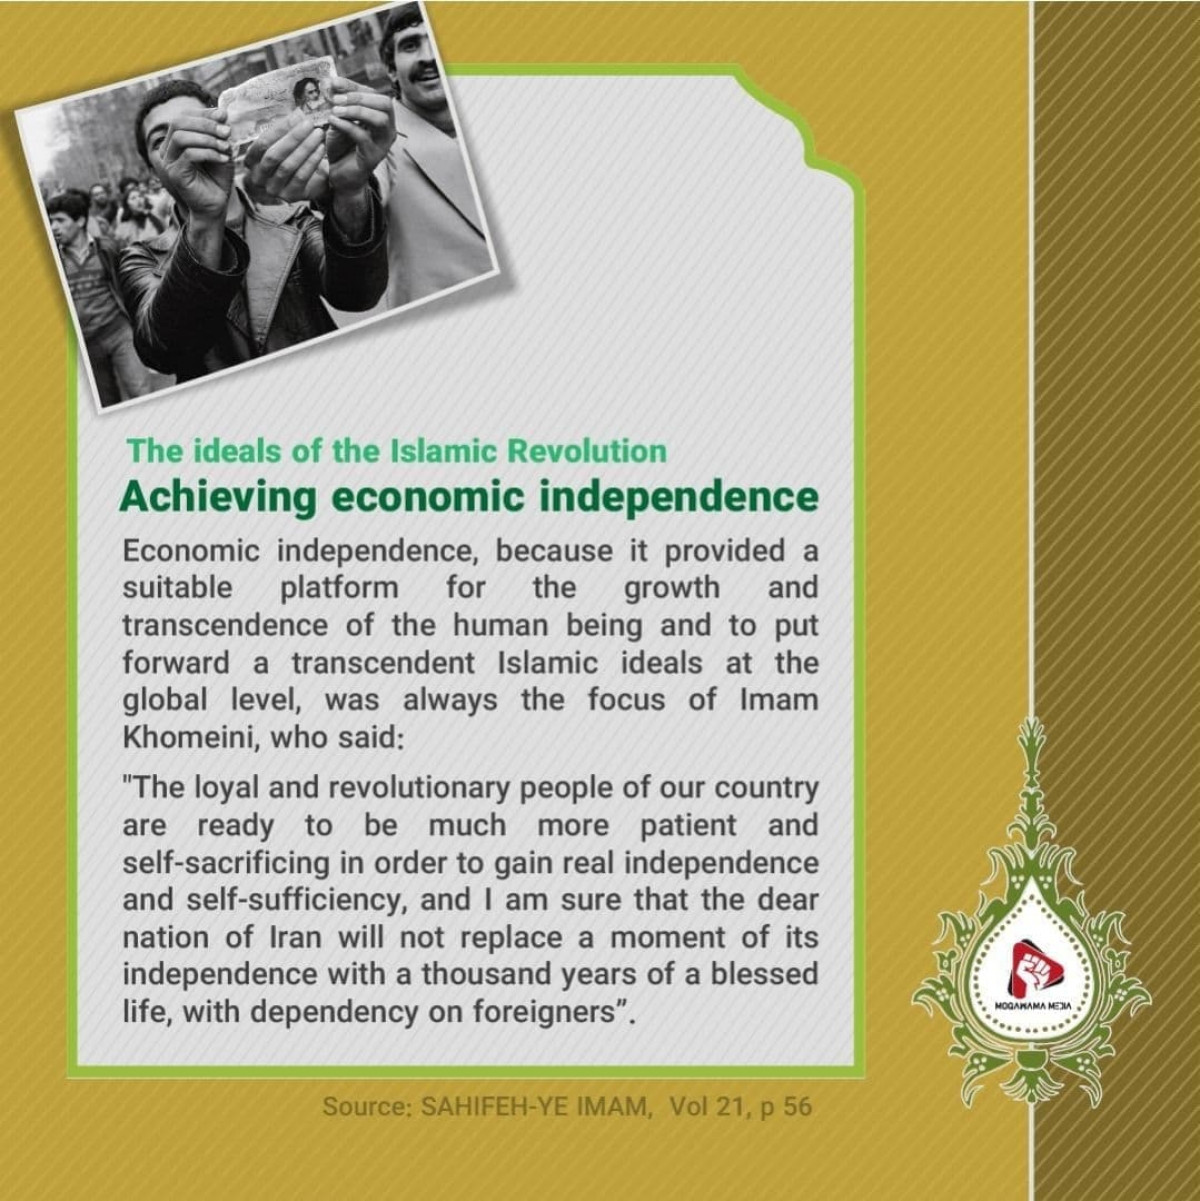 The ideals of the Islamic Revolution: Achieving economic independence